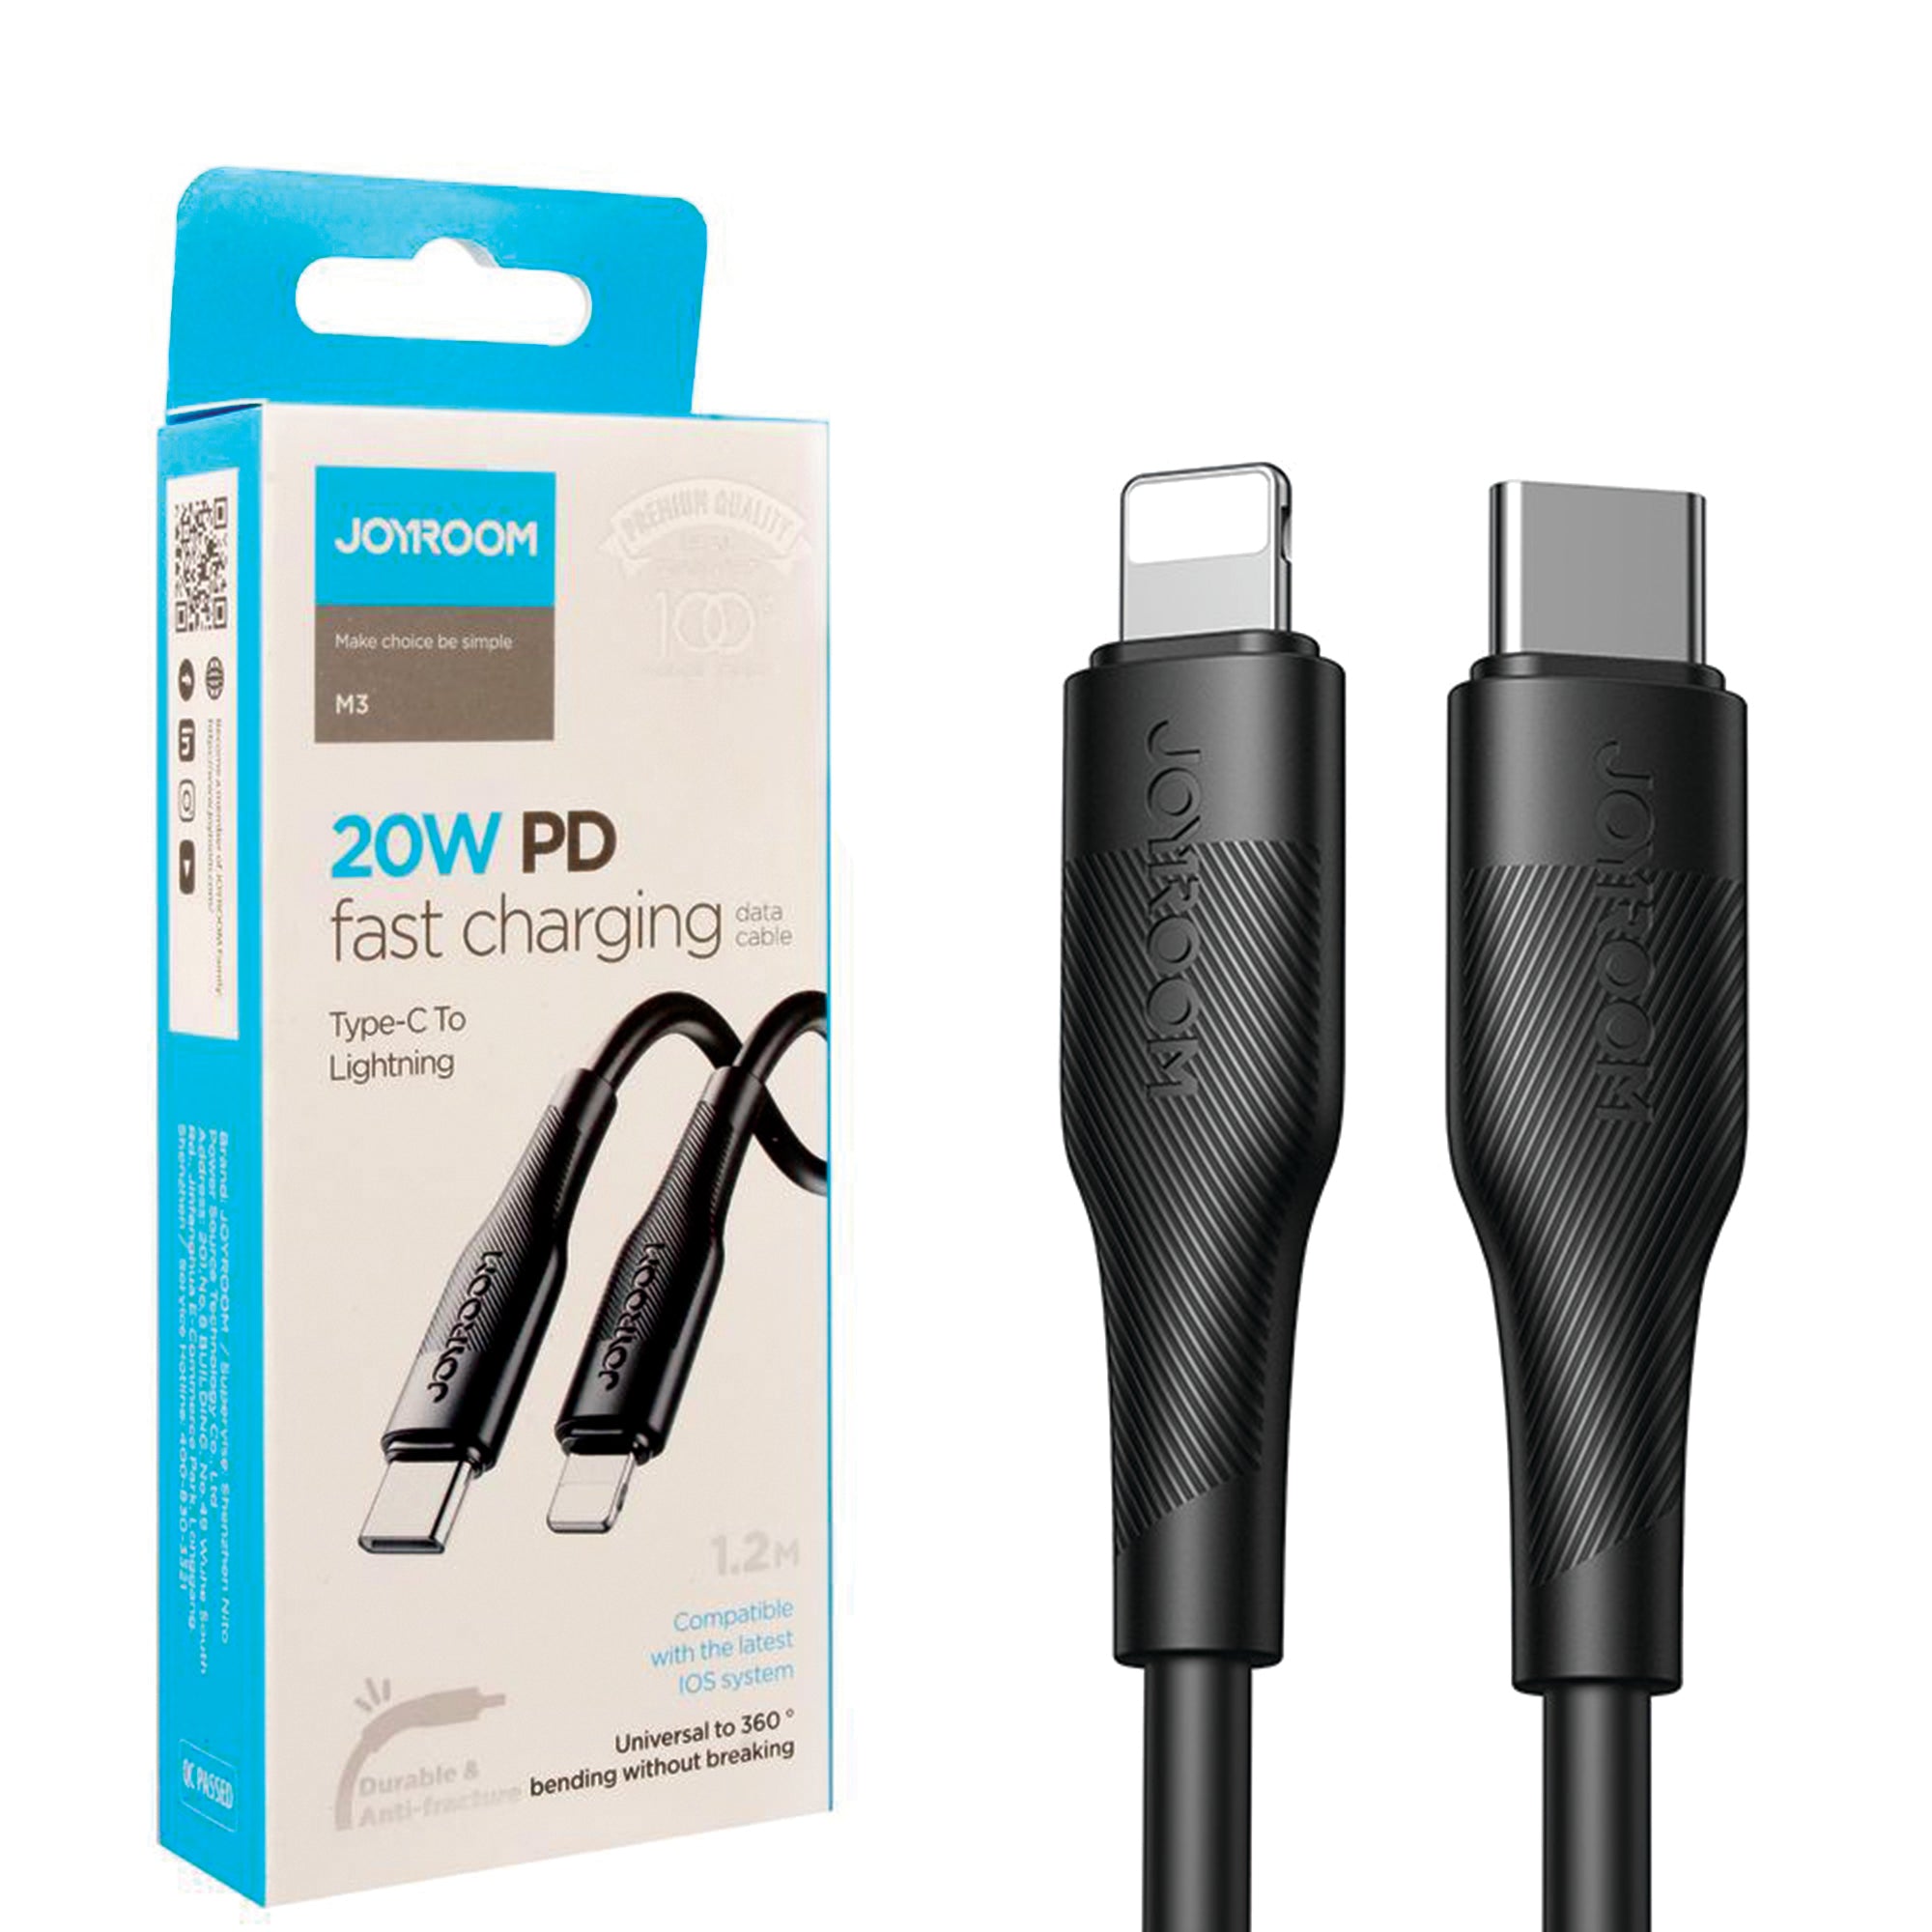 Joyroom S-1224m3 Type-c To Lightning Fast Charging Cable 1.2m